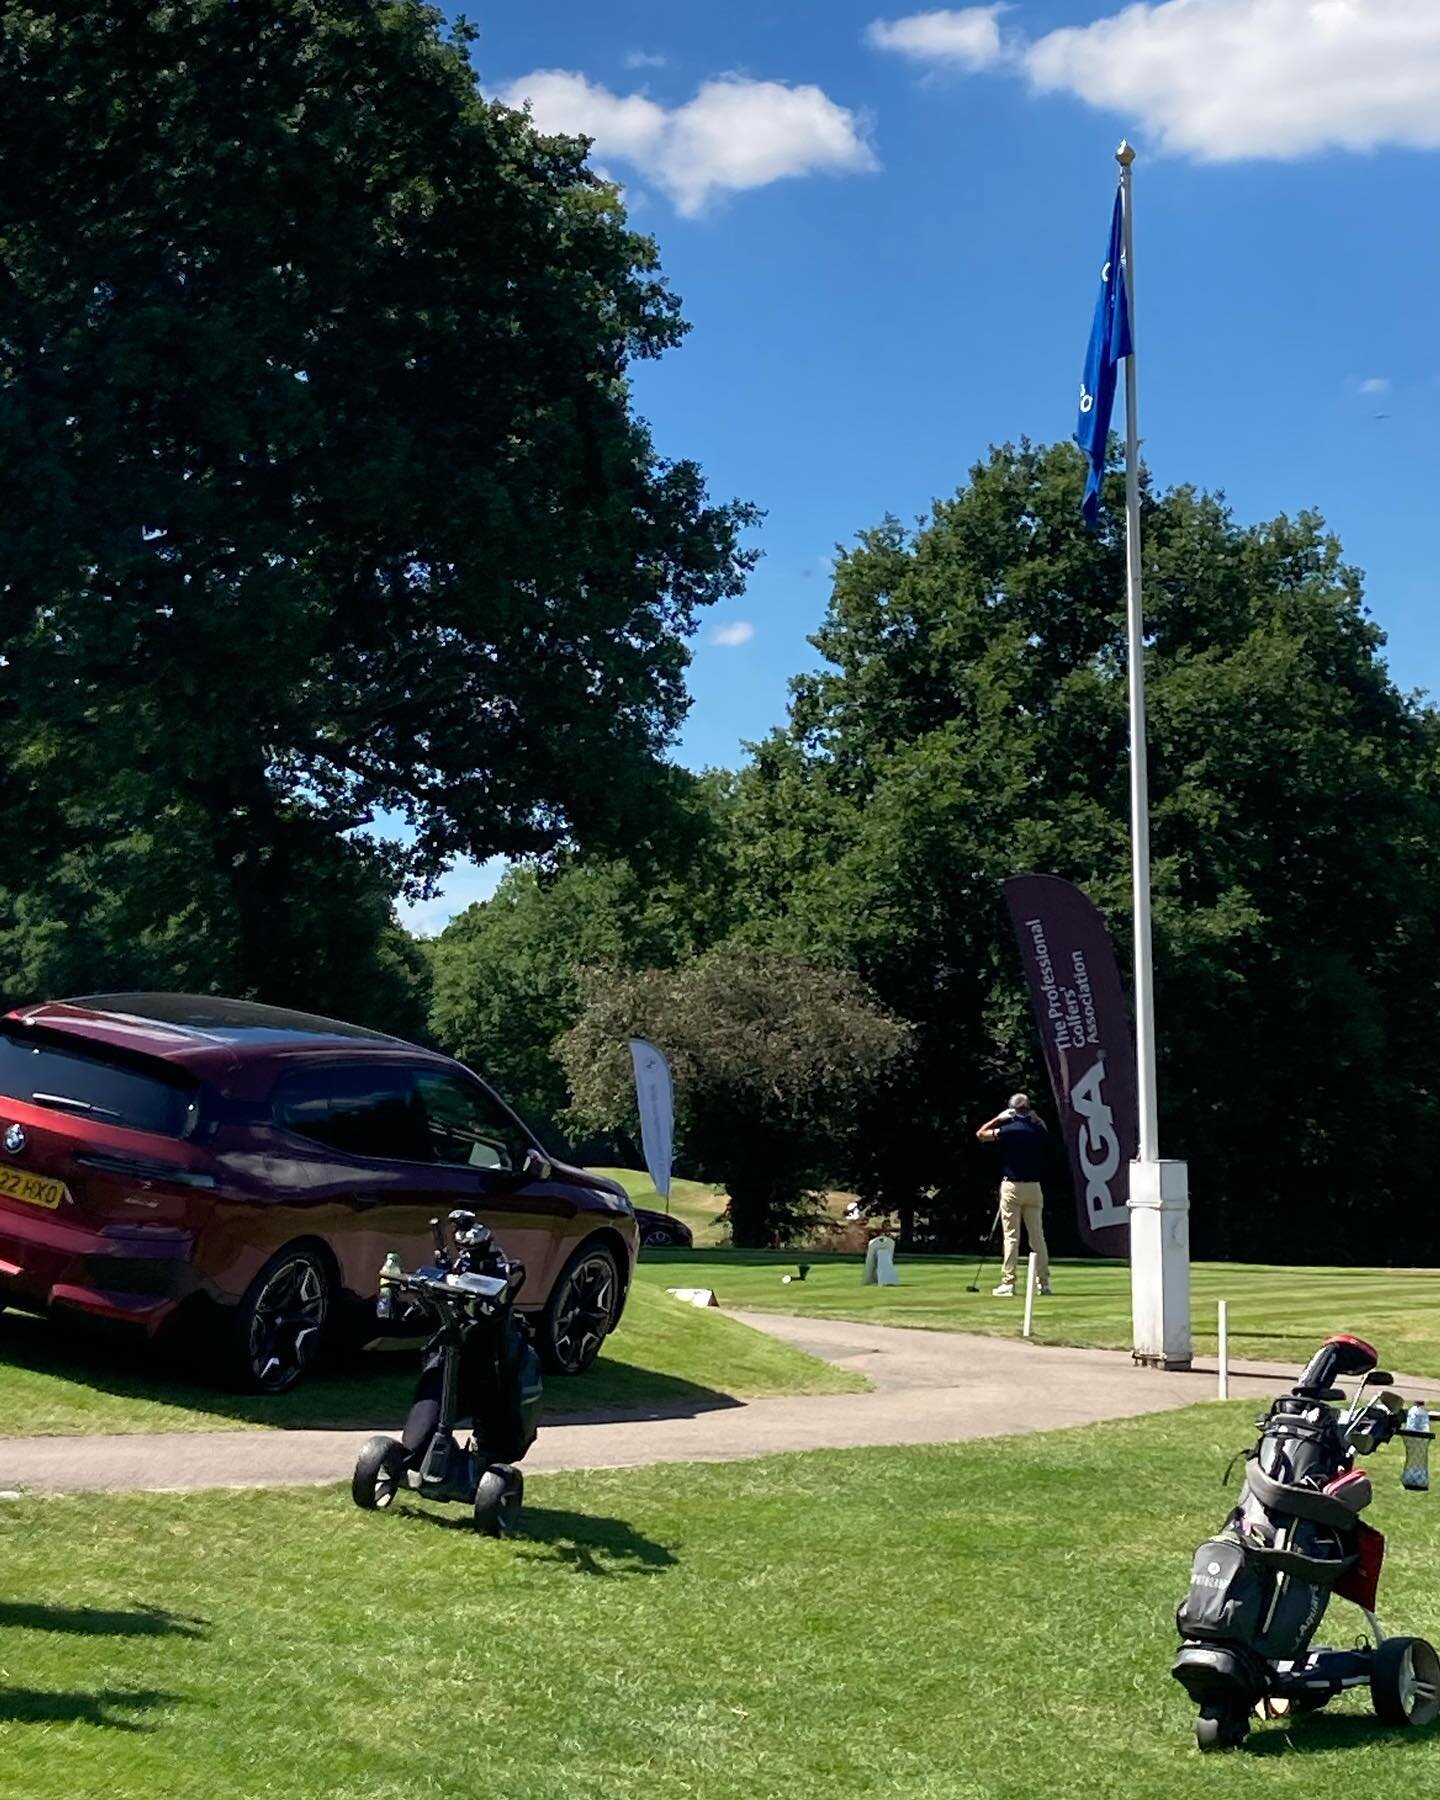 Great day @southhertsgolfclub today for there annual #proam managed to get it going on the back 9 and hole some putts. Thanks to the #pgaeast for all there hard work as usual. #golfcompetition #progolf #pgaeastregion